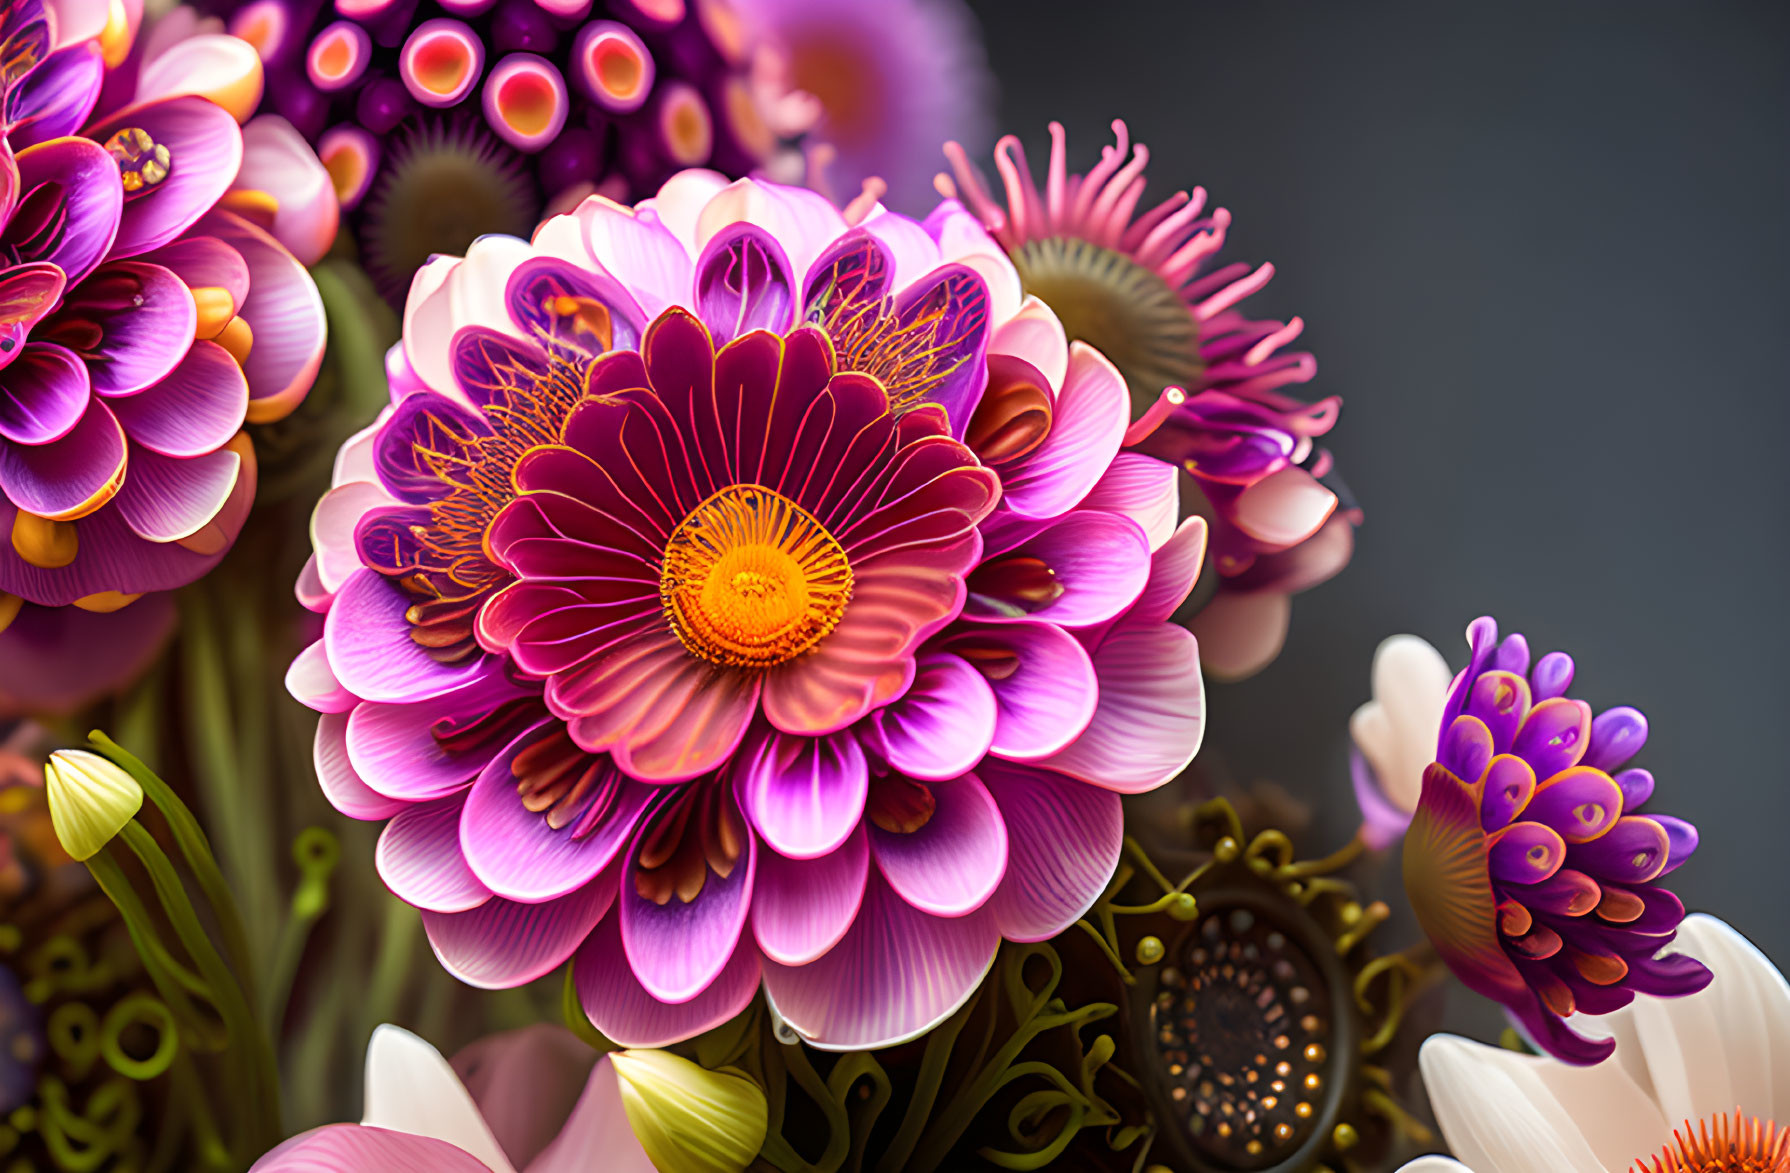 Colorful stylized flower bouquet with intricate purple and pink petals on dark backdrop